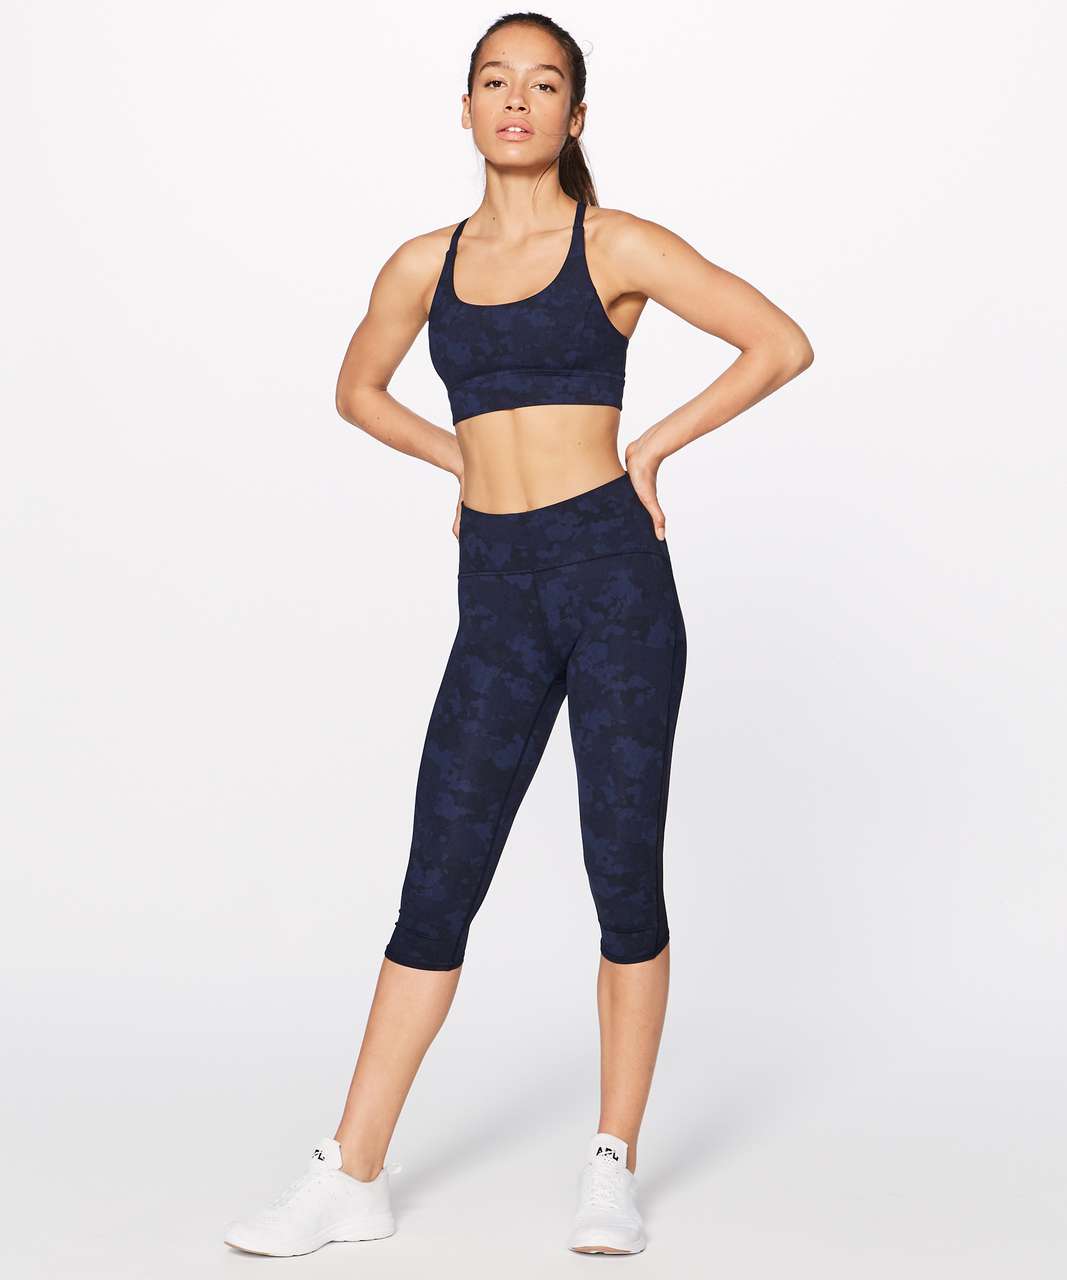 Lululemon Train Times Bra - Wee Are From Space Alpine White